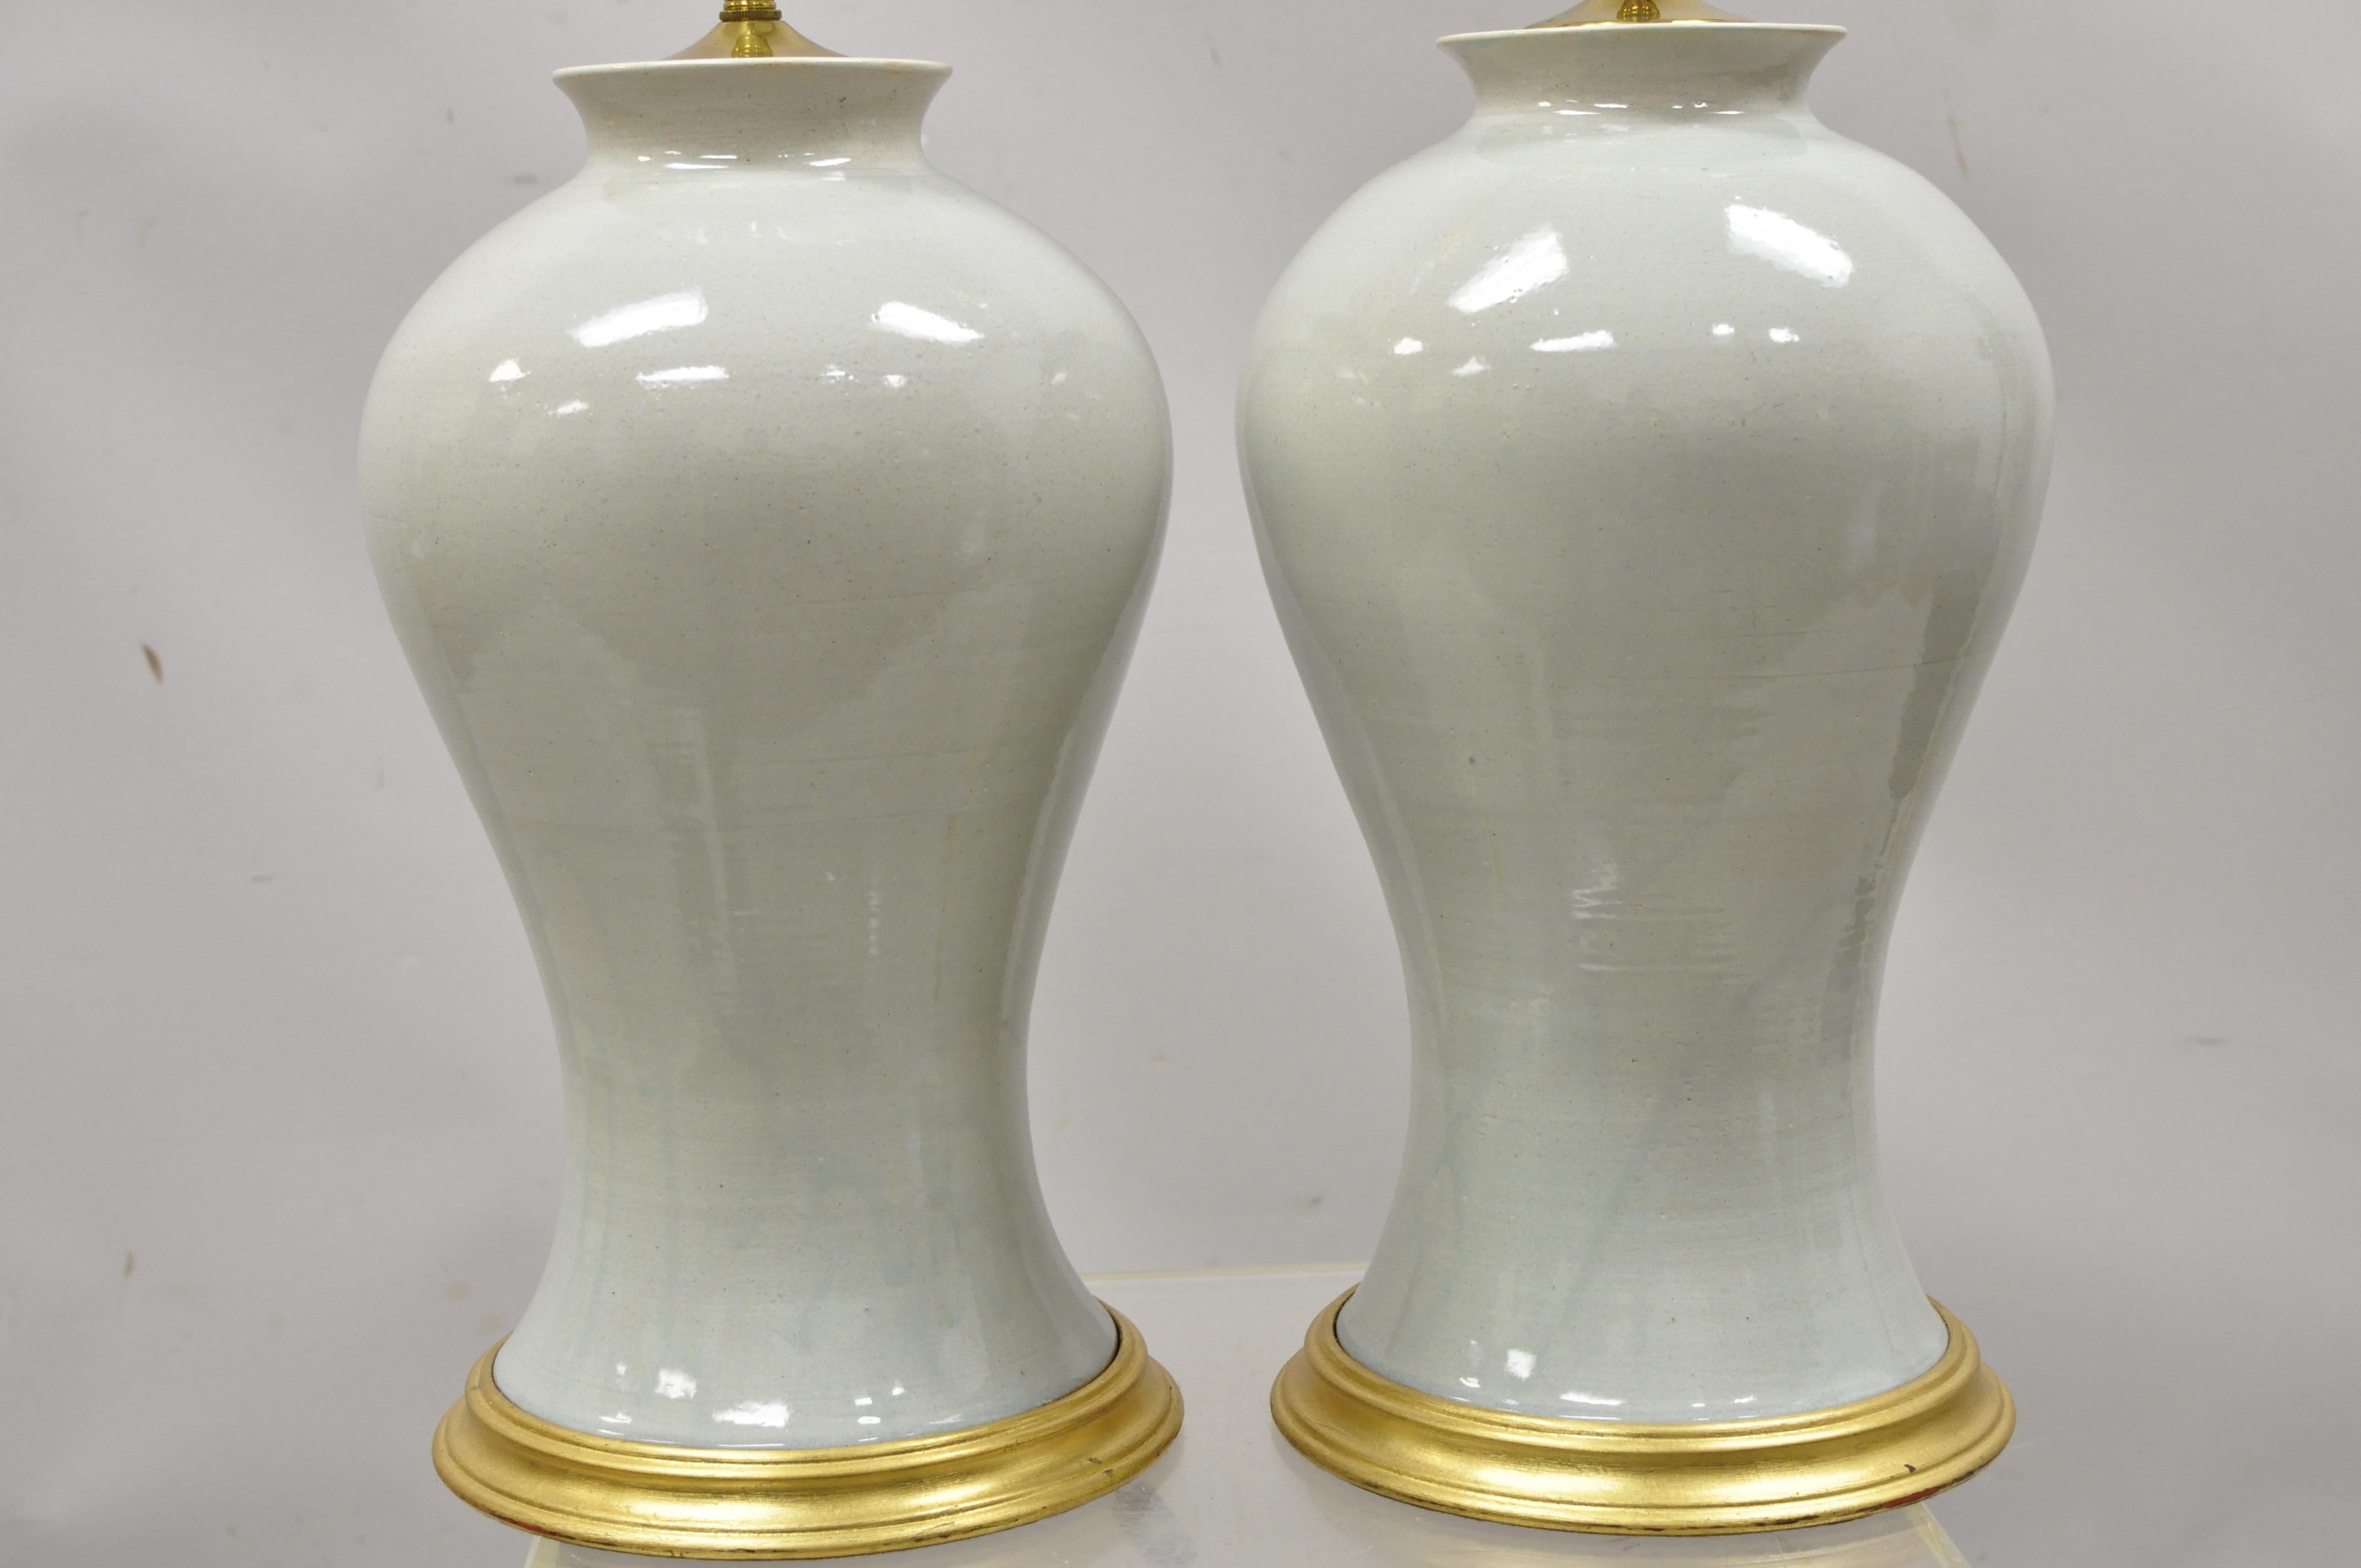 Pair of Modern Celadon Green Glazed Ceramic Brass Bulbous Stoneware Table Lamps In Good Condition For Sale In Philadelphia, PA